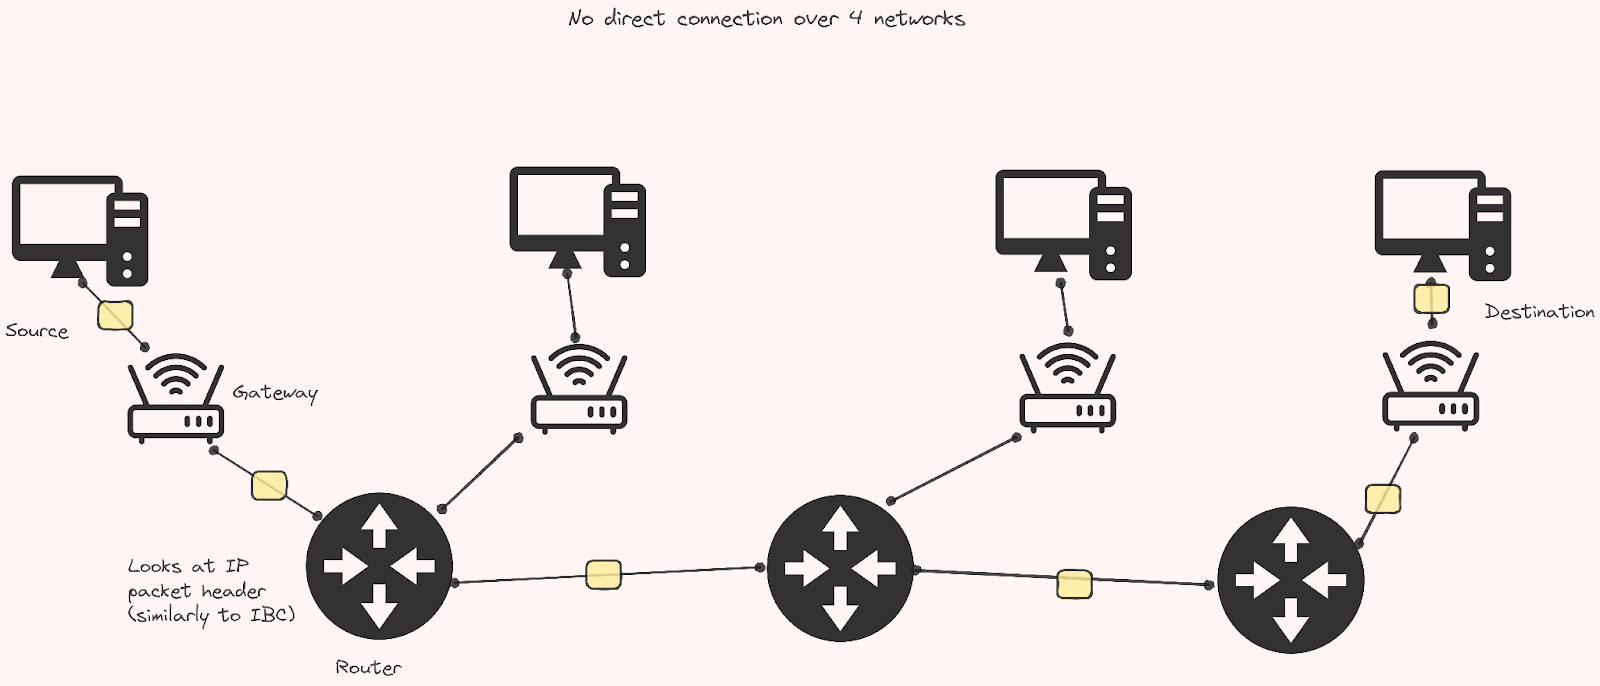  If the destination is directly connected to the same router, the packet is forwarded directly to that. If the destination network is not directly connected, the packet is forwarded on to a second router that is the next-hop router. 